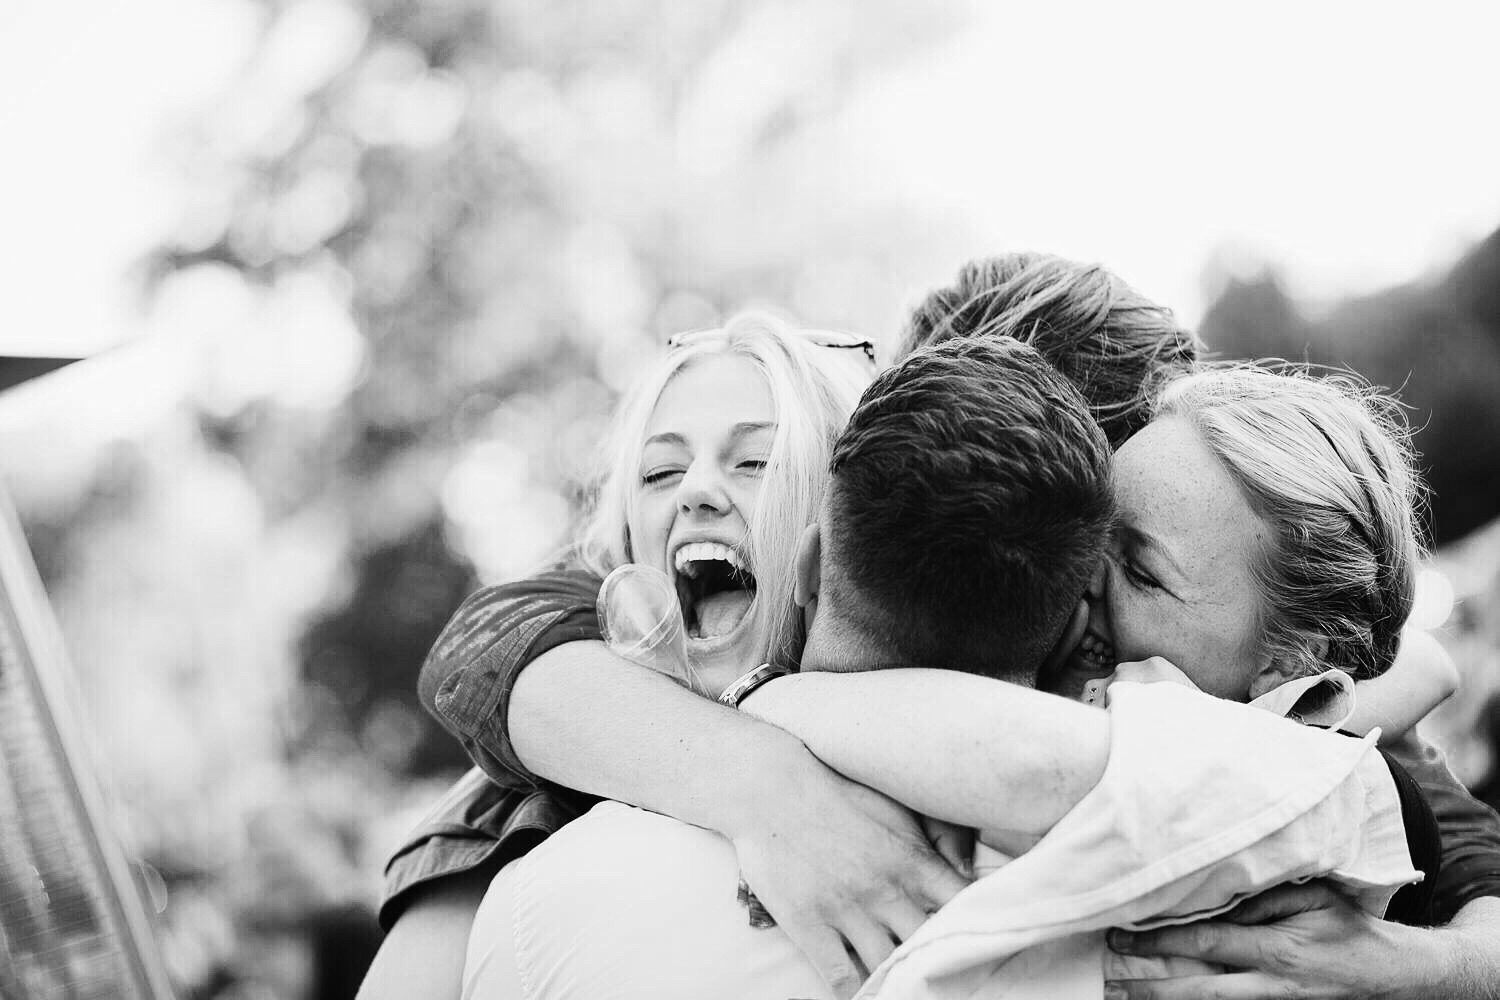 A black and white image shows four friends embracing with excitement